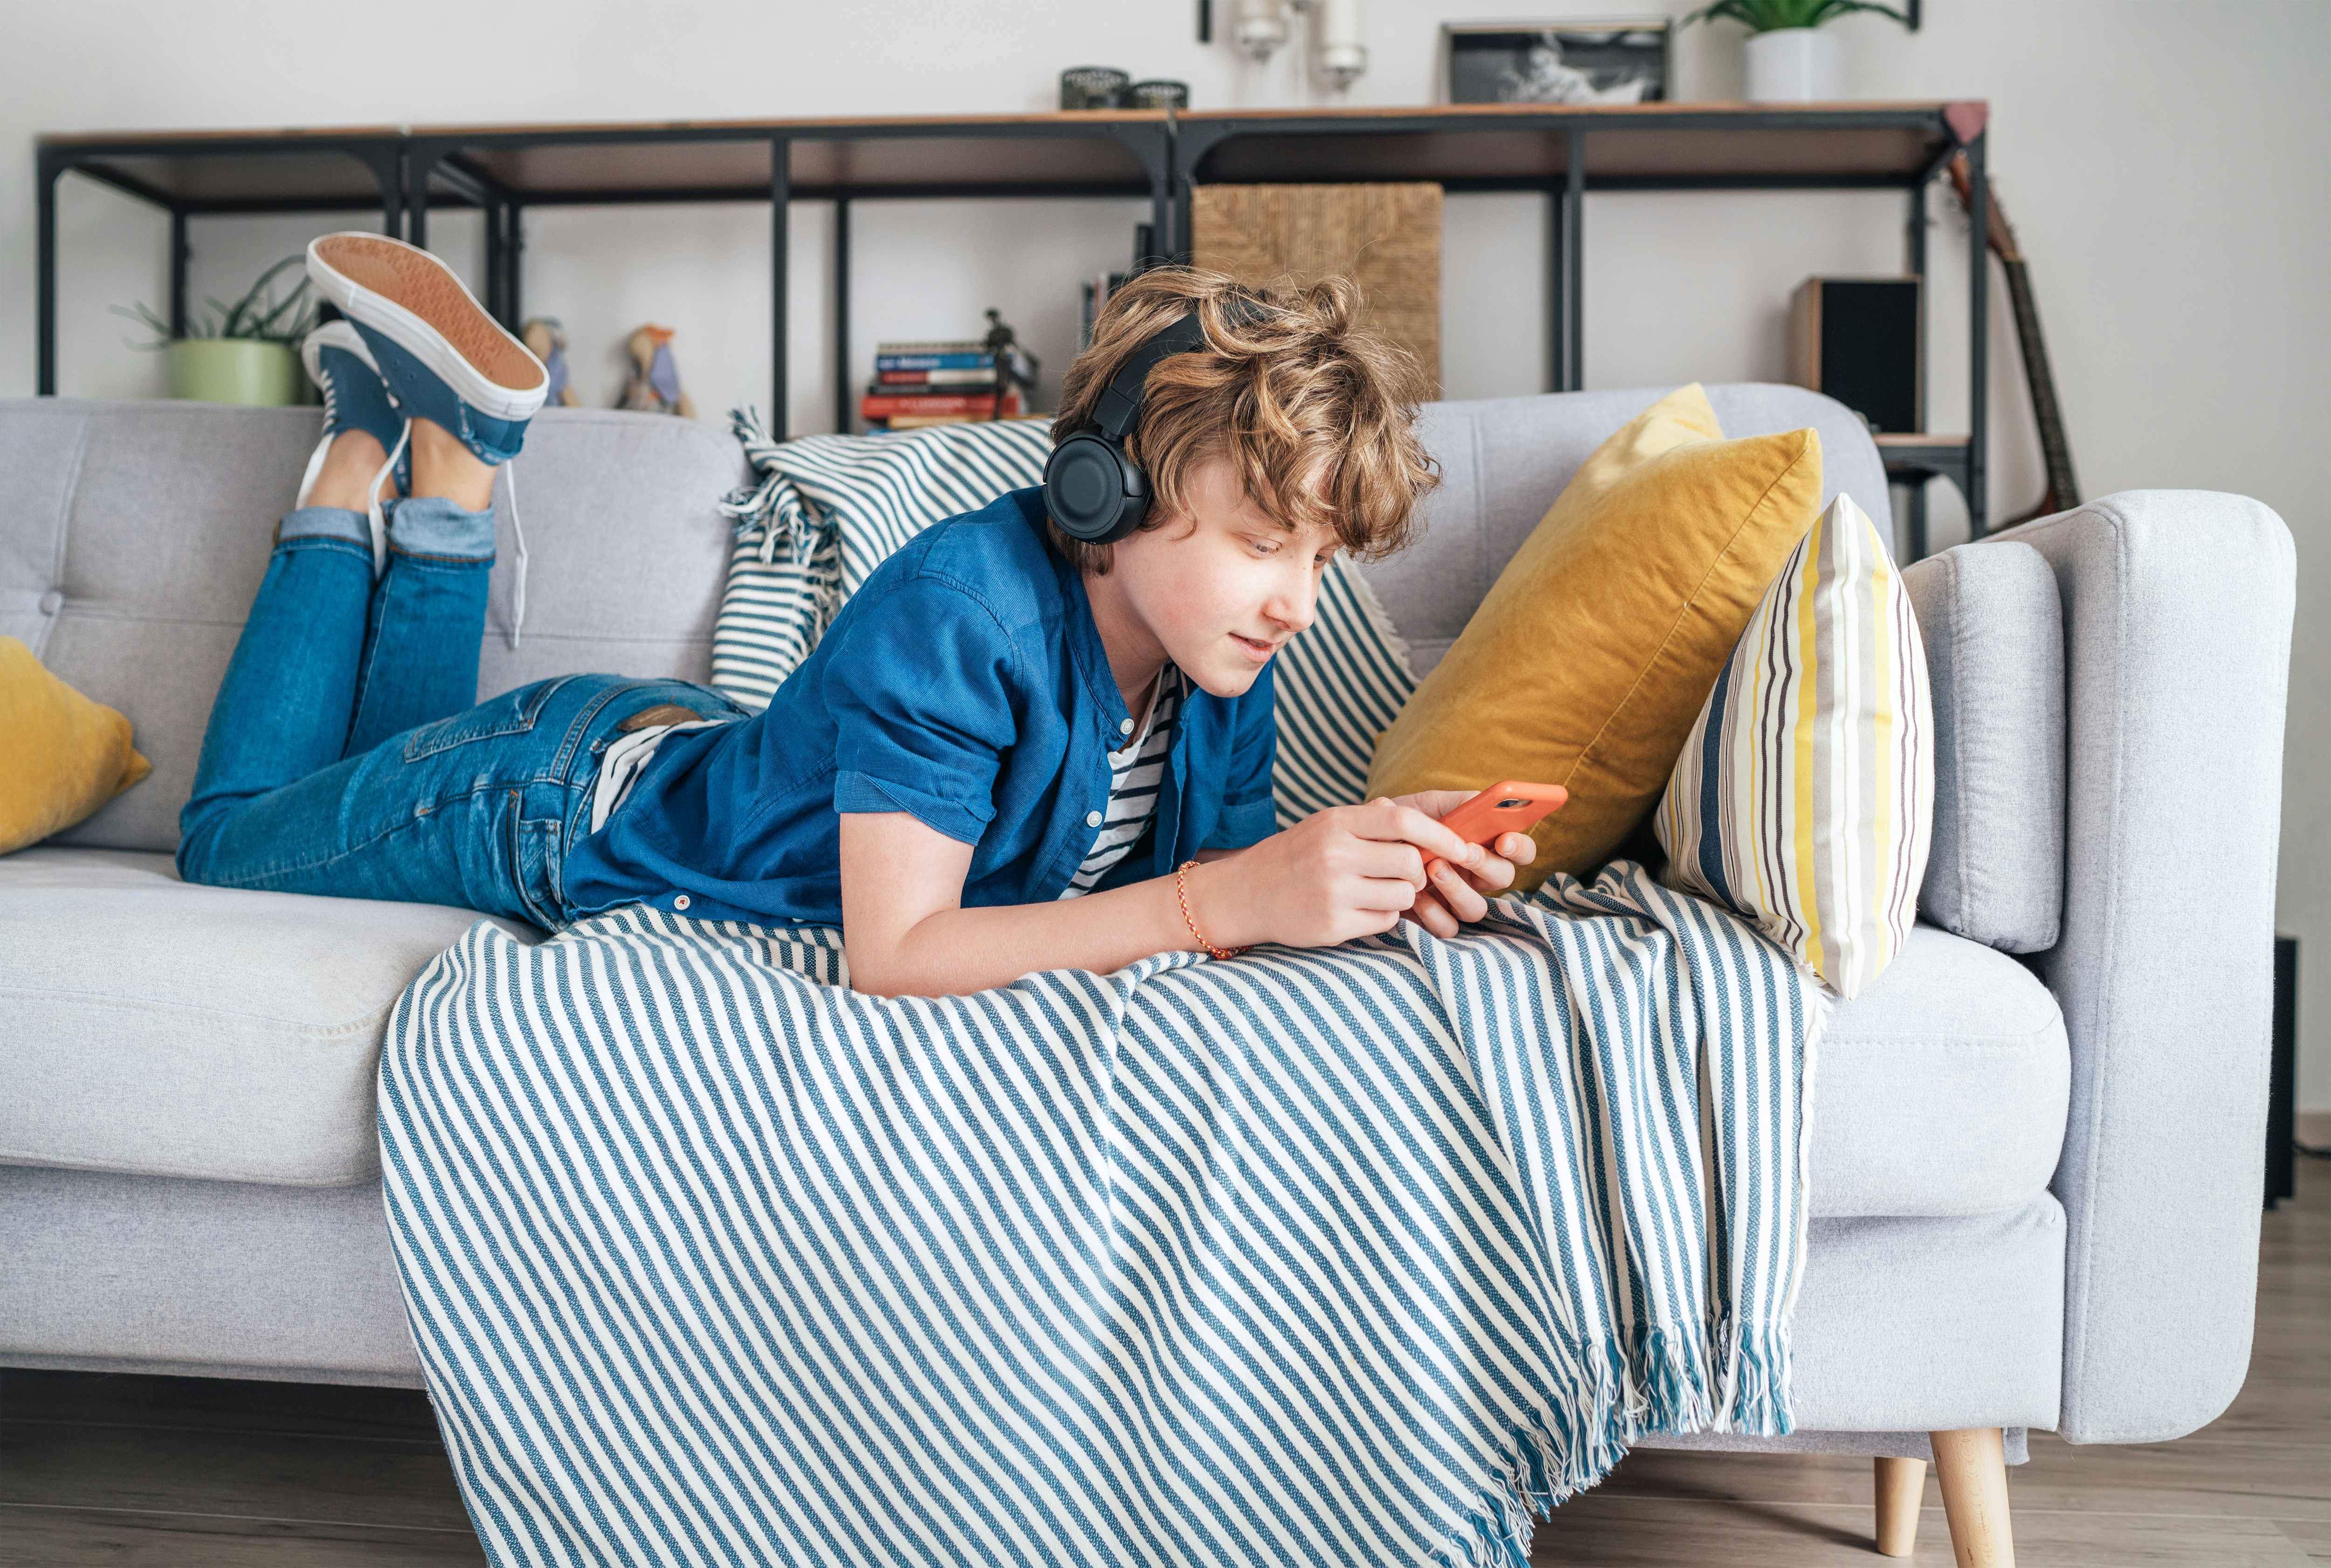 Preteen boy lying at home on cozy sofa dressed casual jeans and shirt. listening to music and chatting using wireless headphones connected with smartphone. Child using electronic devices concept